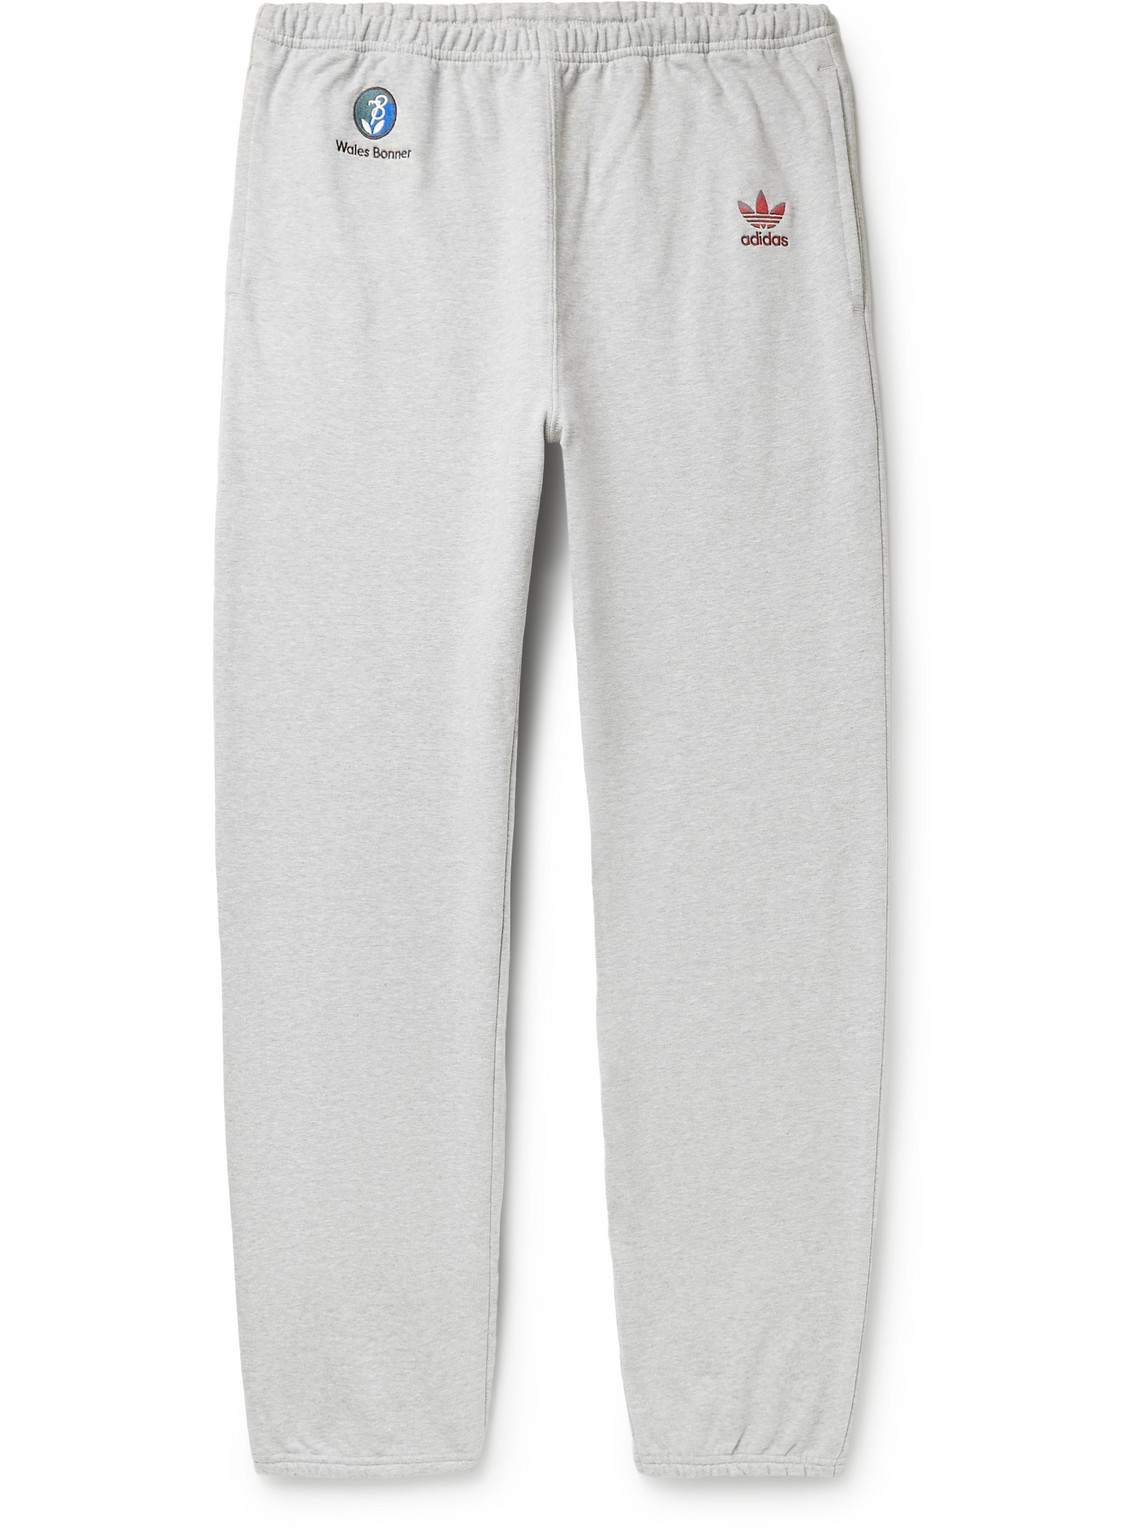 Adidas Consortium Wales Bonner Tapered Cotton-jersey Sweatpants In Gray